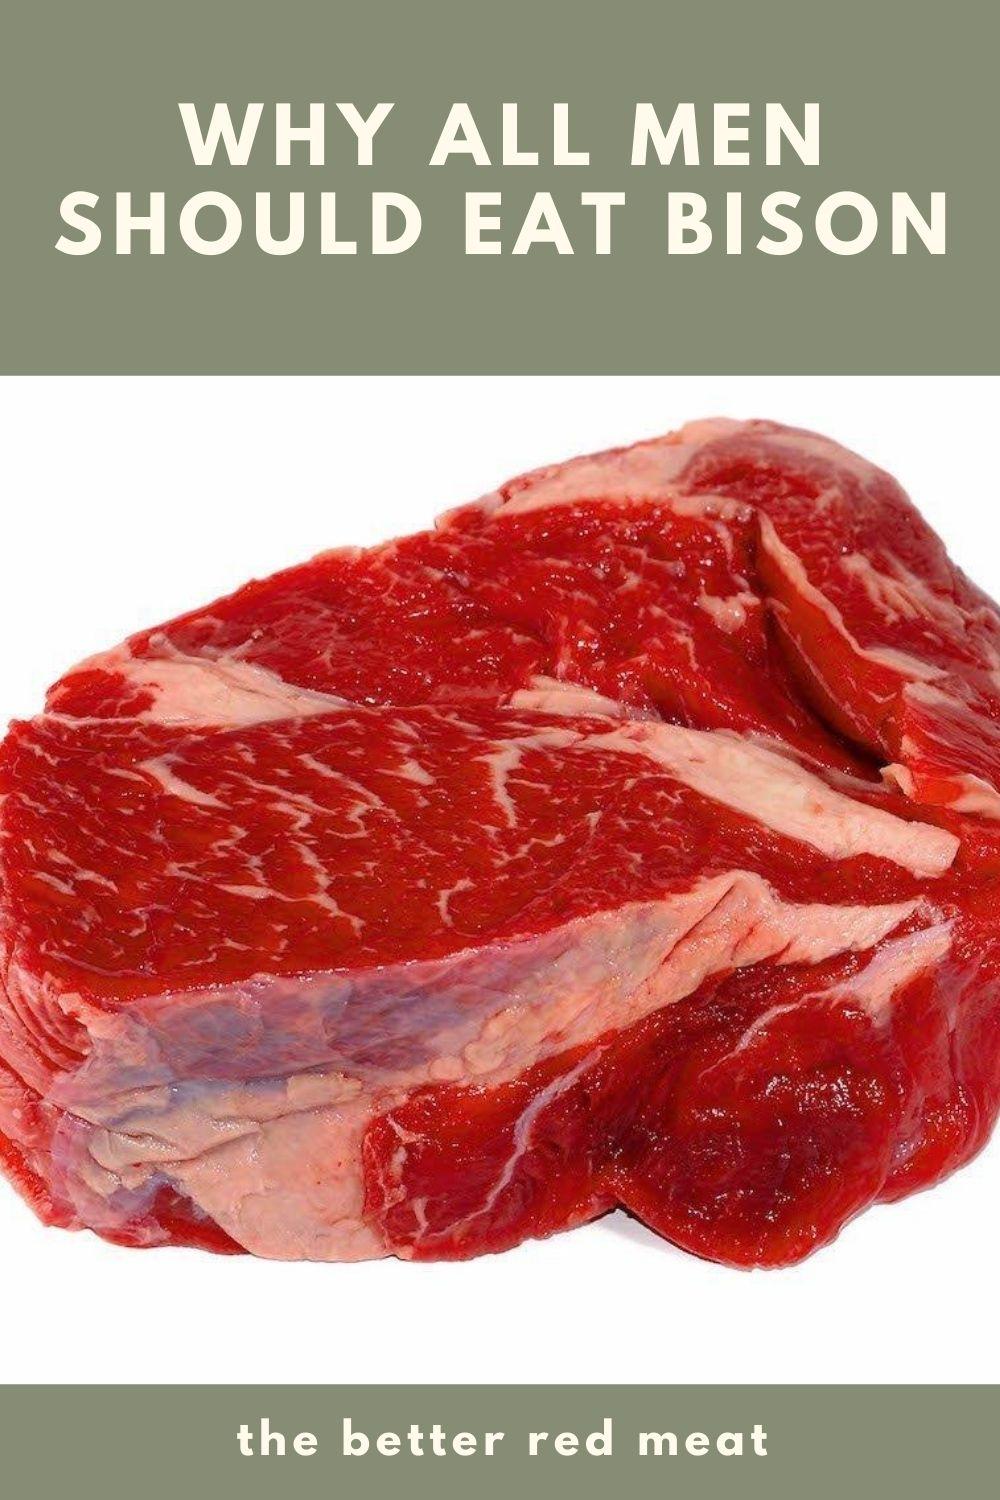 the benefits of bison meat graphic